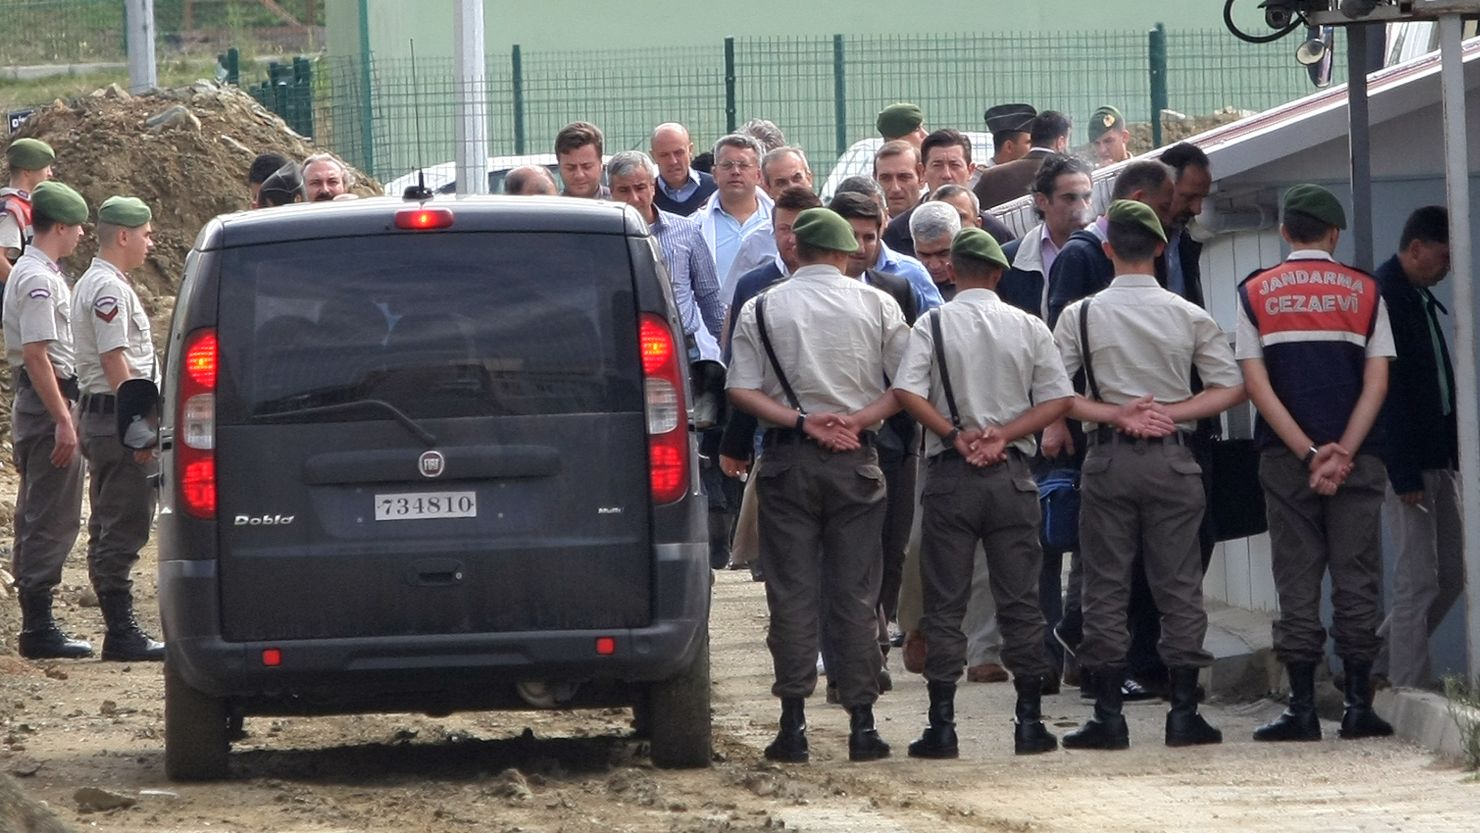 Turkish soldiers, under pretrial detention, arrive Friday at court in Silivri, near Istanbul.